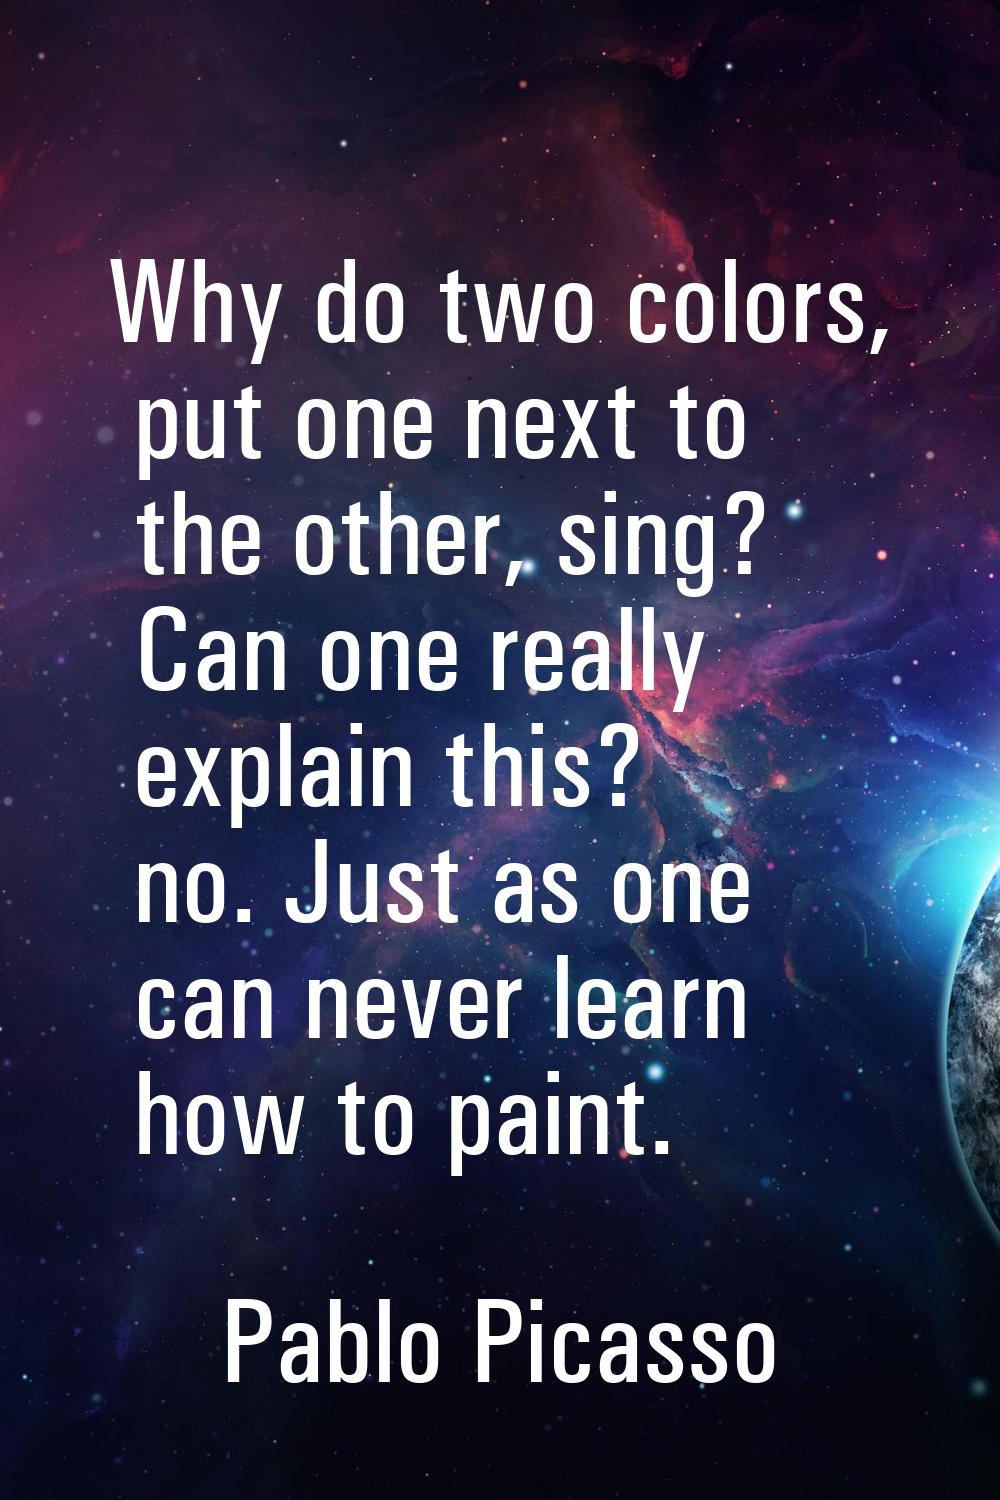 Why do two colors, put one next to the other, sing? Can one really explain this? no. Just as one ca